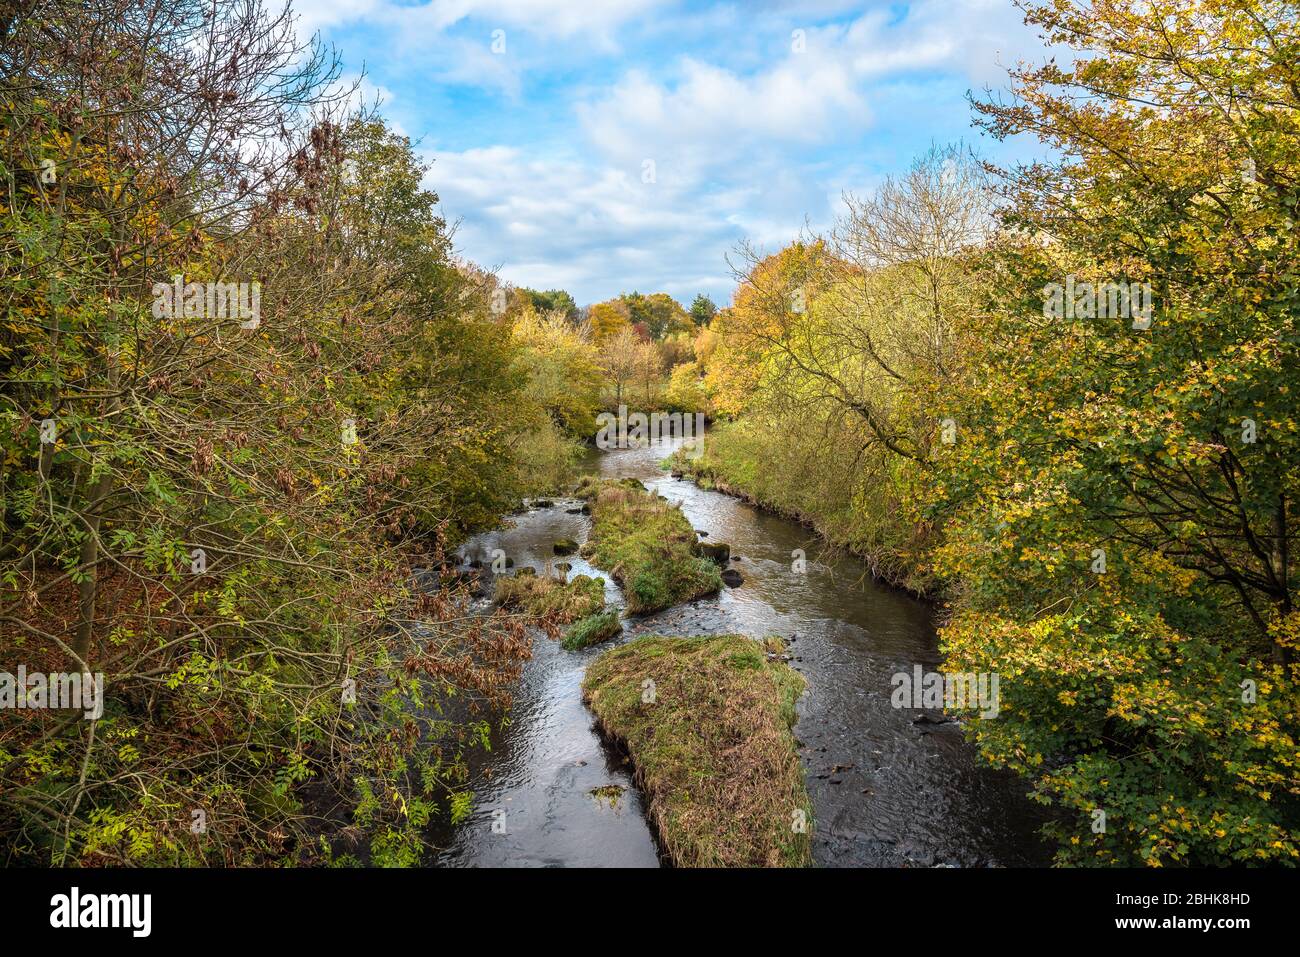 River with forested banks under blue sky with clouds in Autumn. Beautiful fallfoliage. Stock Photo